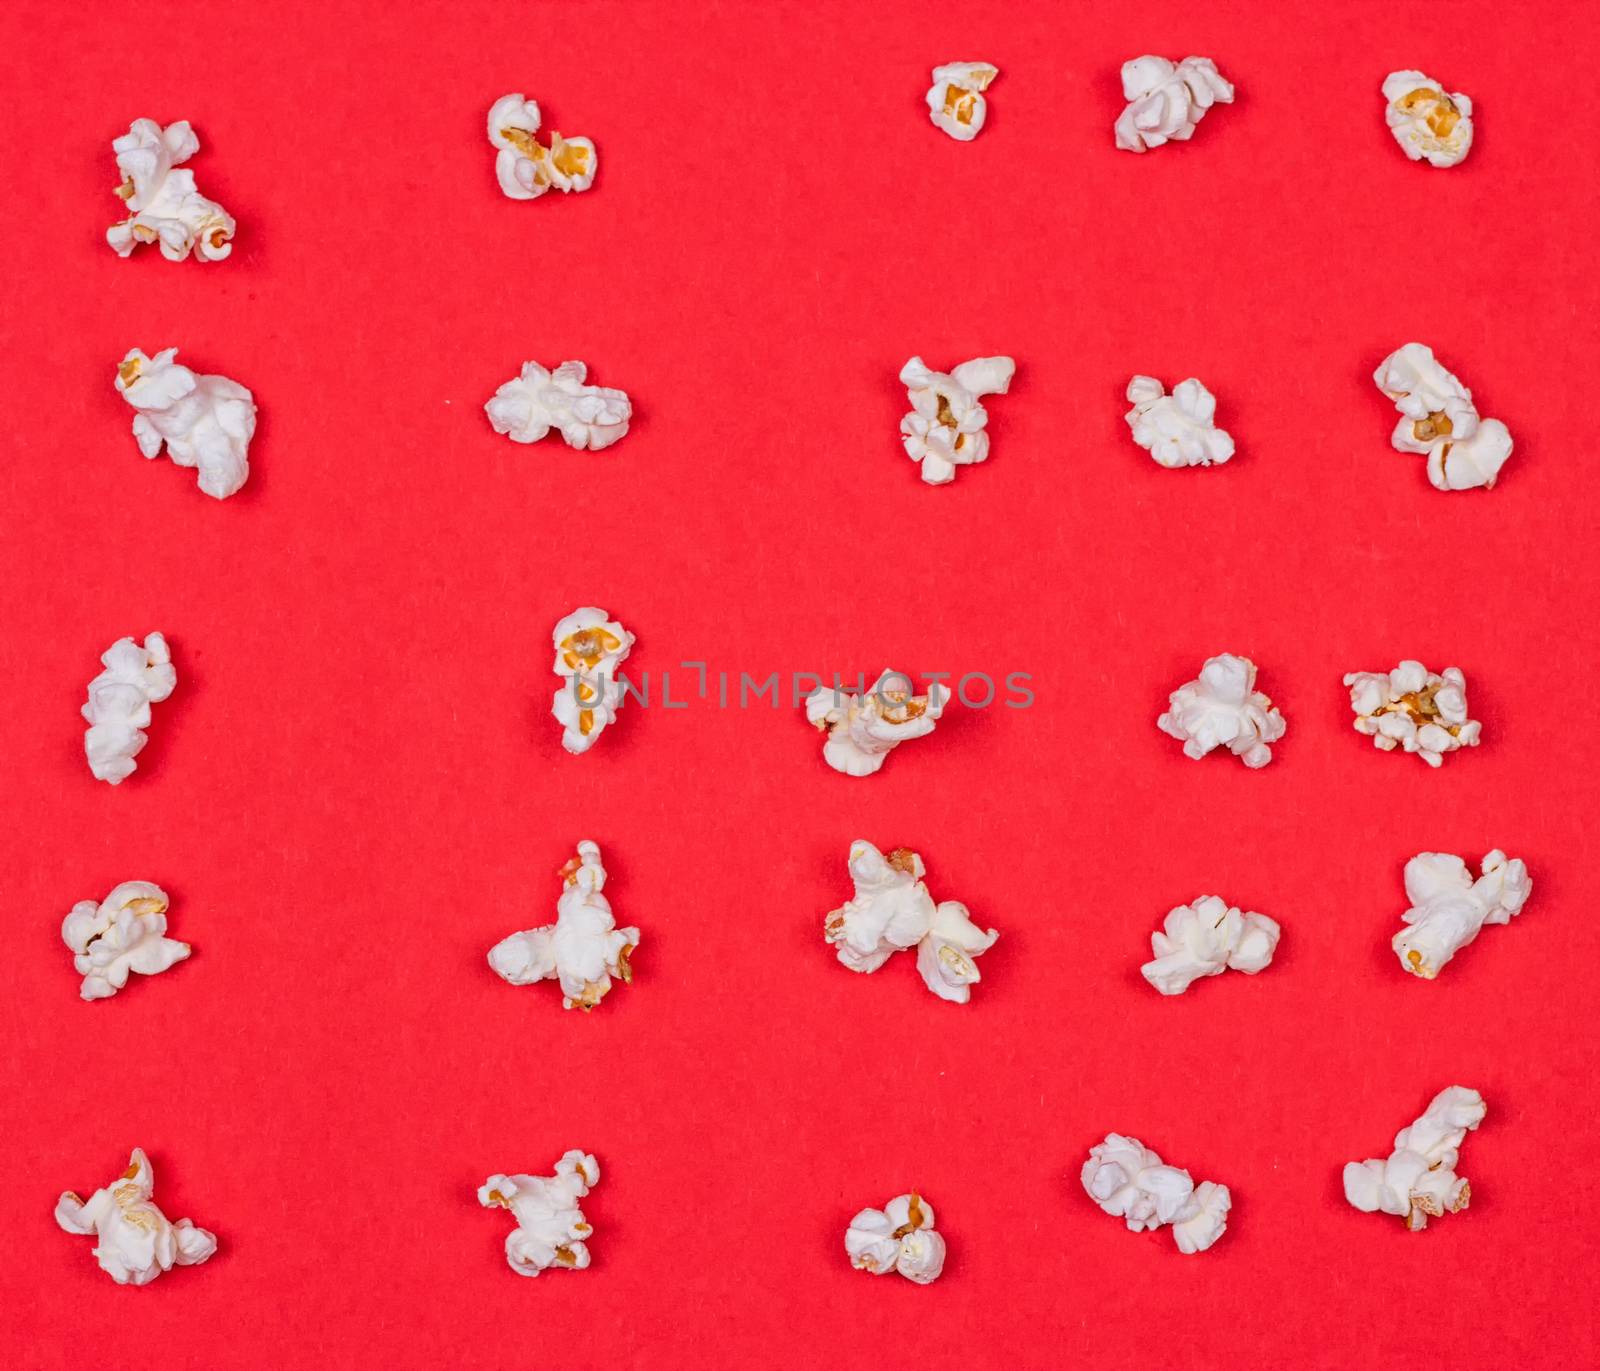 Popcorn on red background by victosha